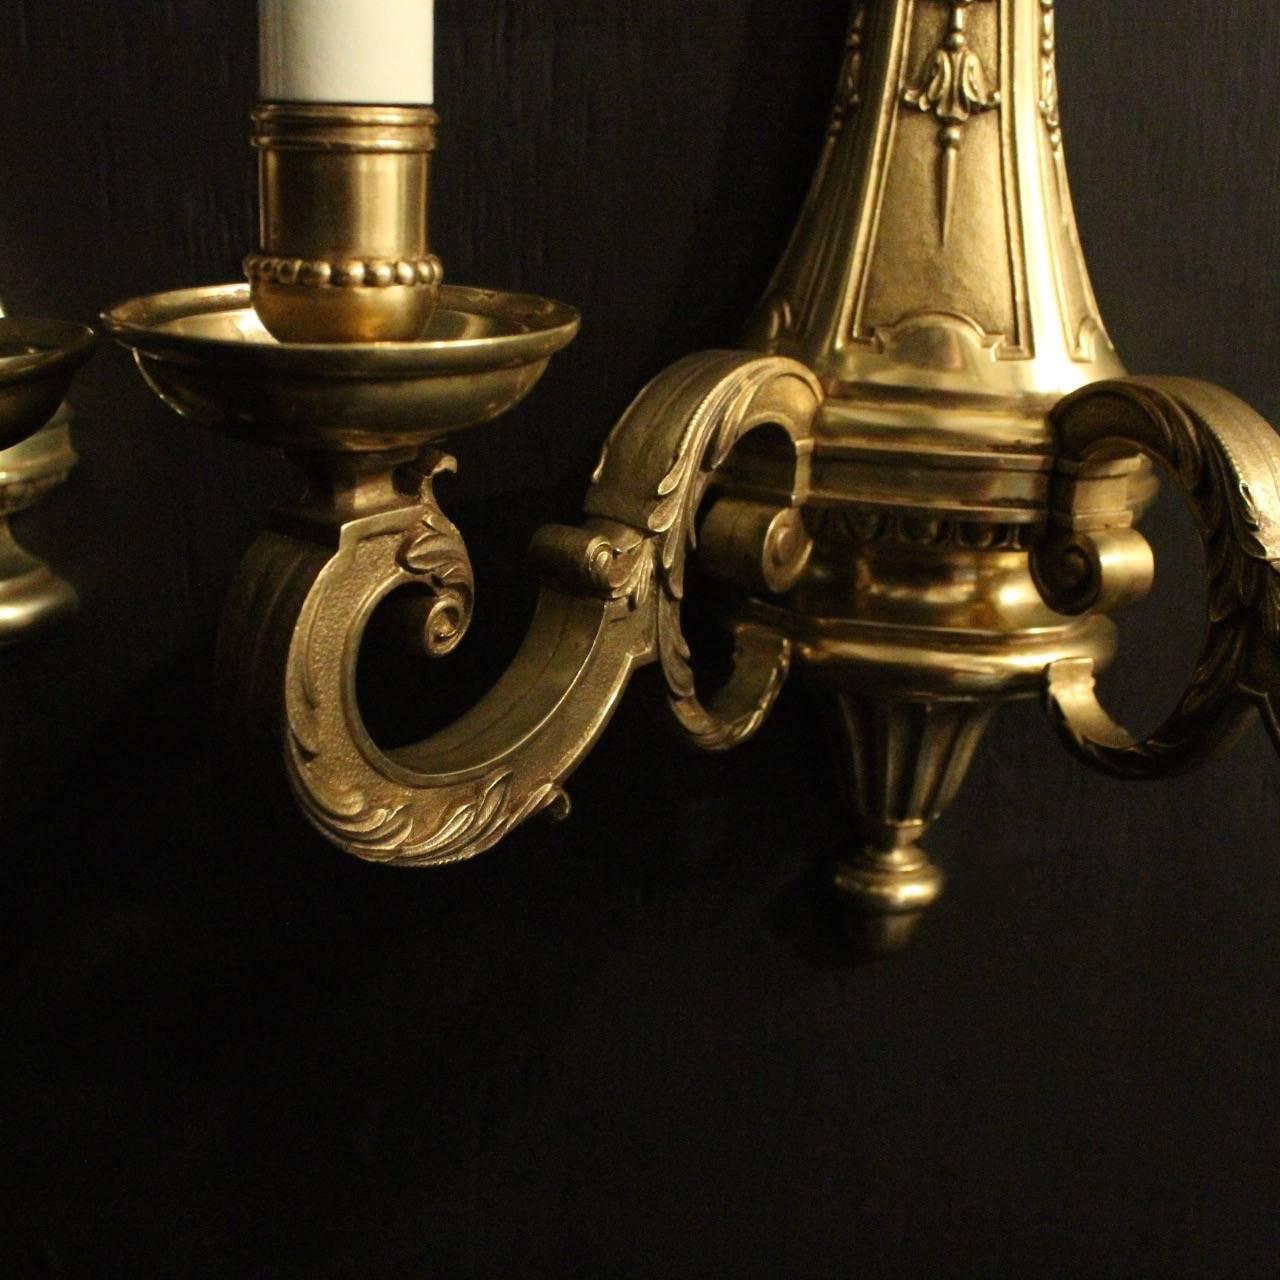 A French pair of bronze twin branch antique wall lights in the Louis XIV taste, the scrolling leaf square gauge scrolling arms with circular bobeche drip pans and millgrain candle sconces, issuing from a foliate moulded back plate with decorative